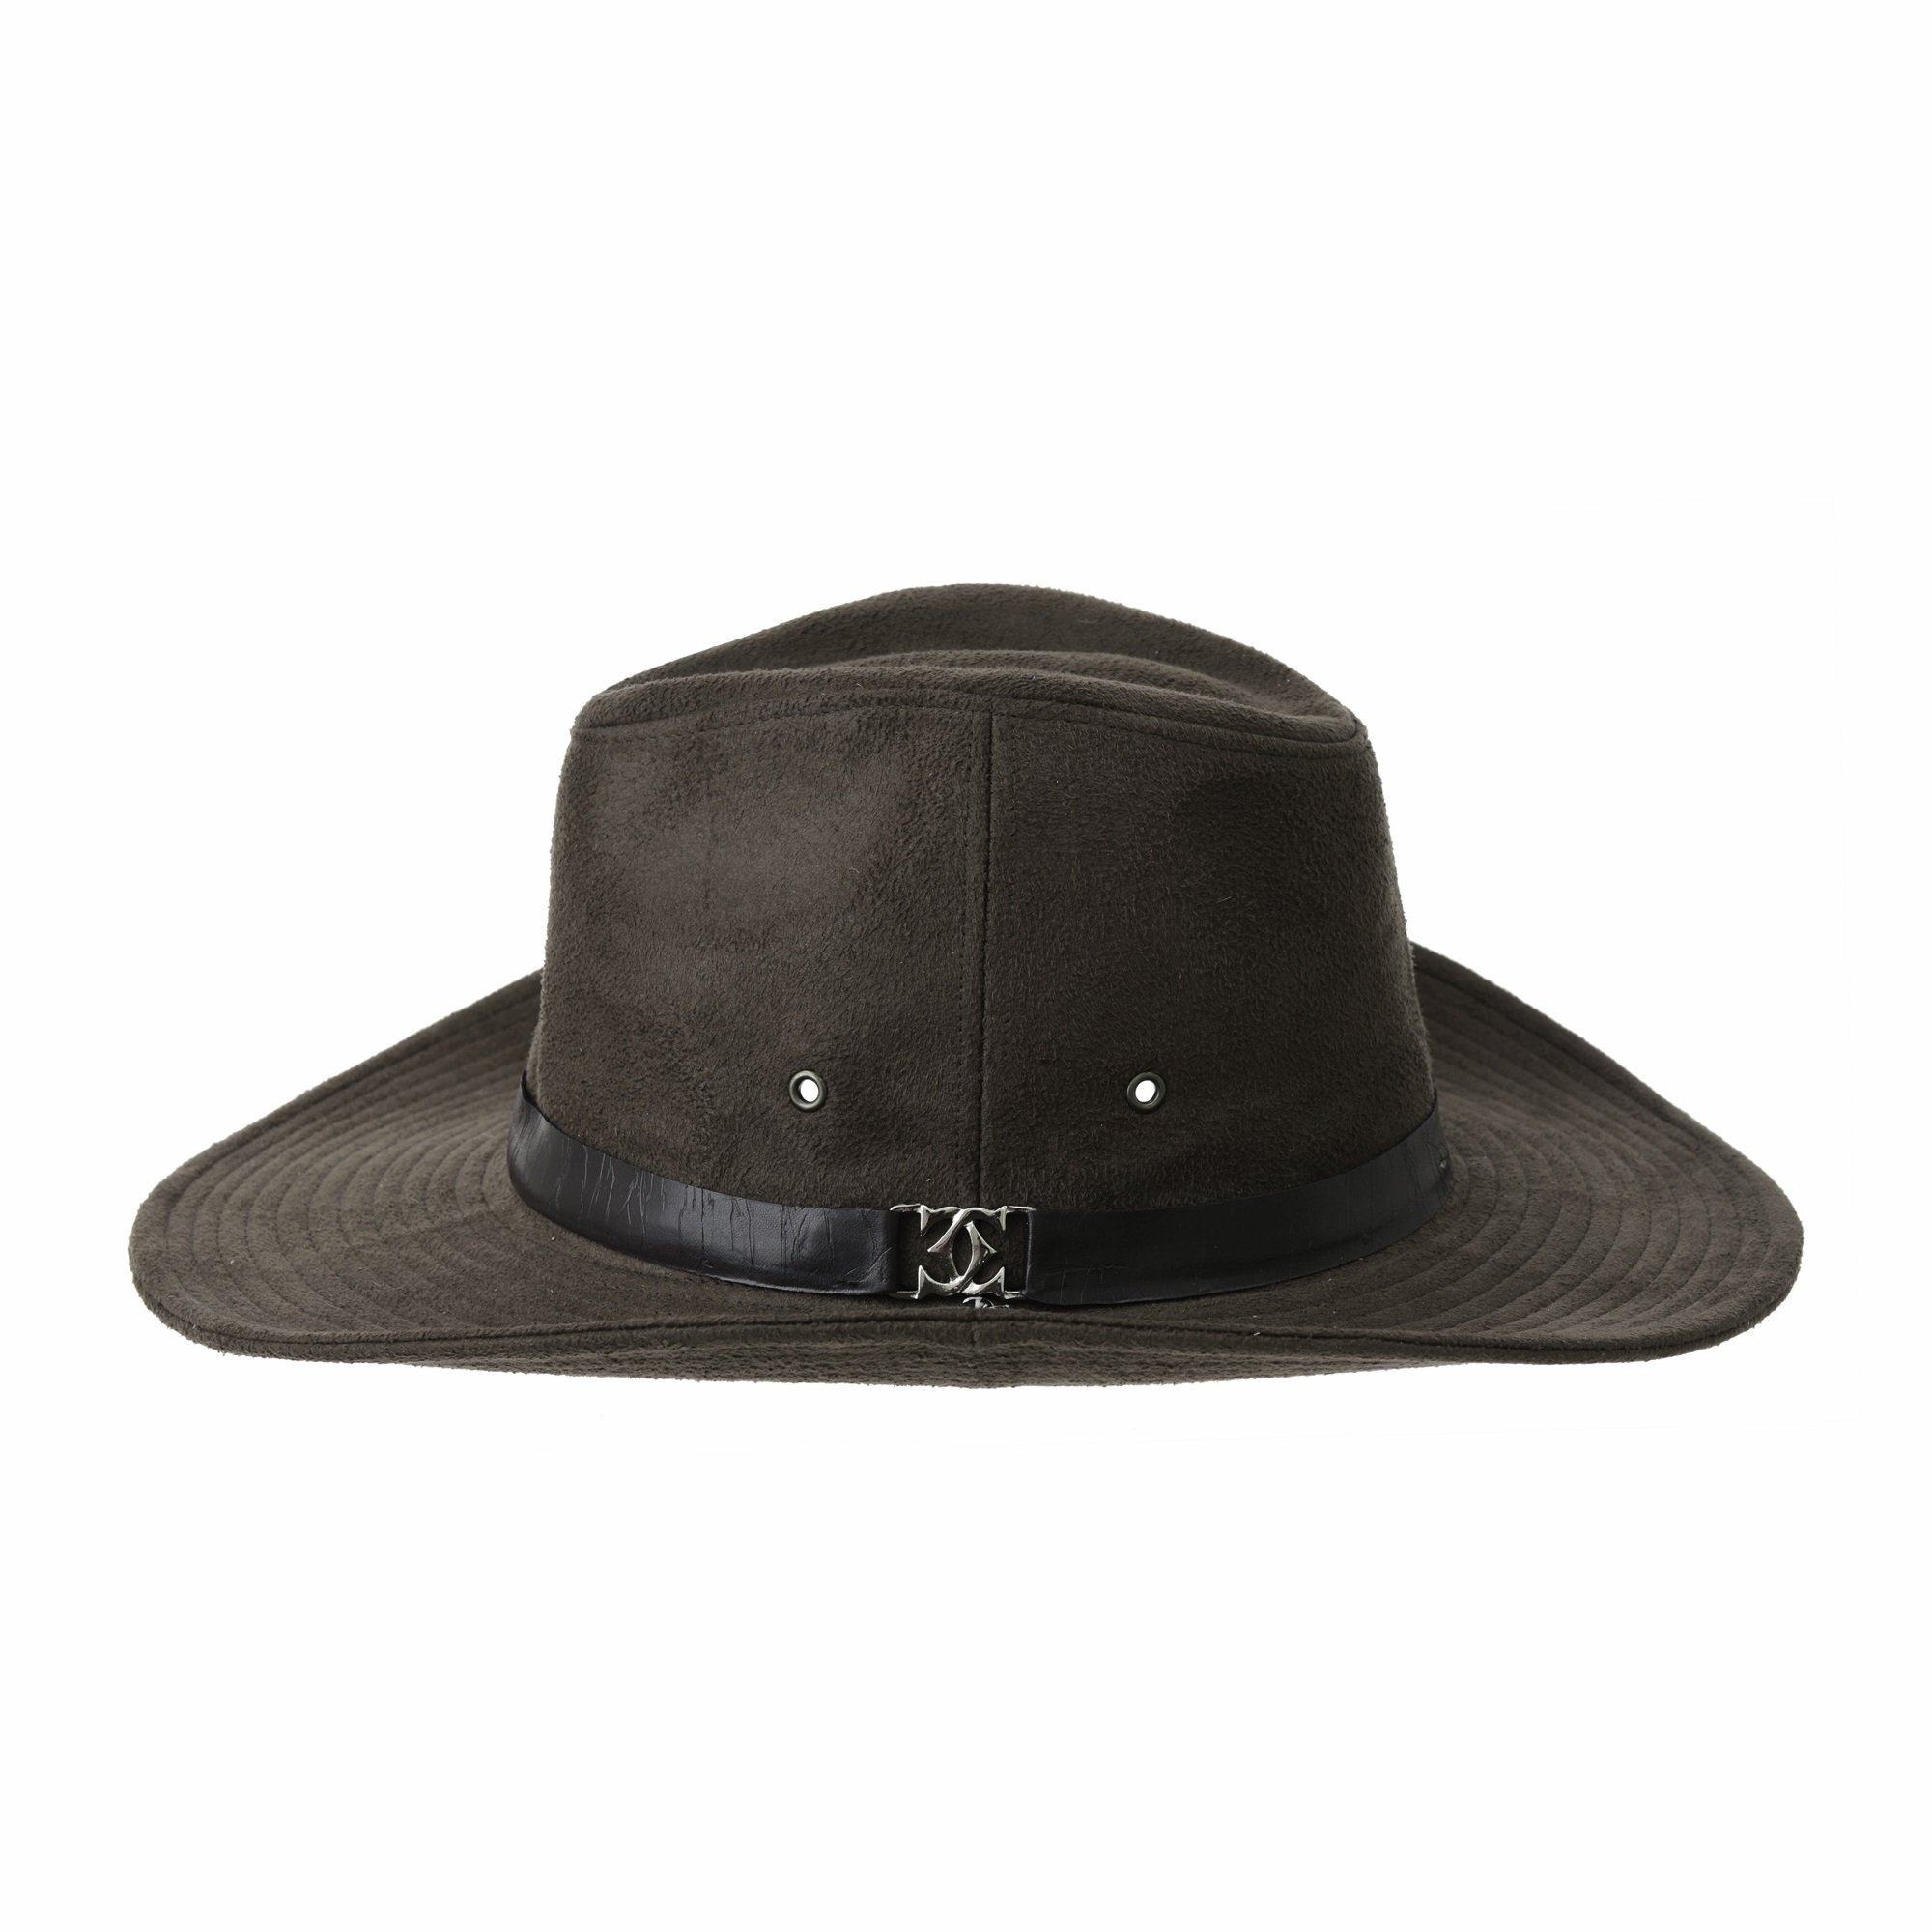 WITHMOONS Suede Indiana Jones Hat Outback Hat Fedora With Cord CD8858 (Brown) - image 2 of 5